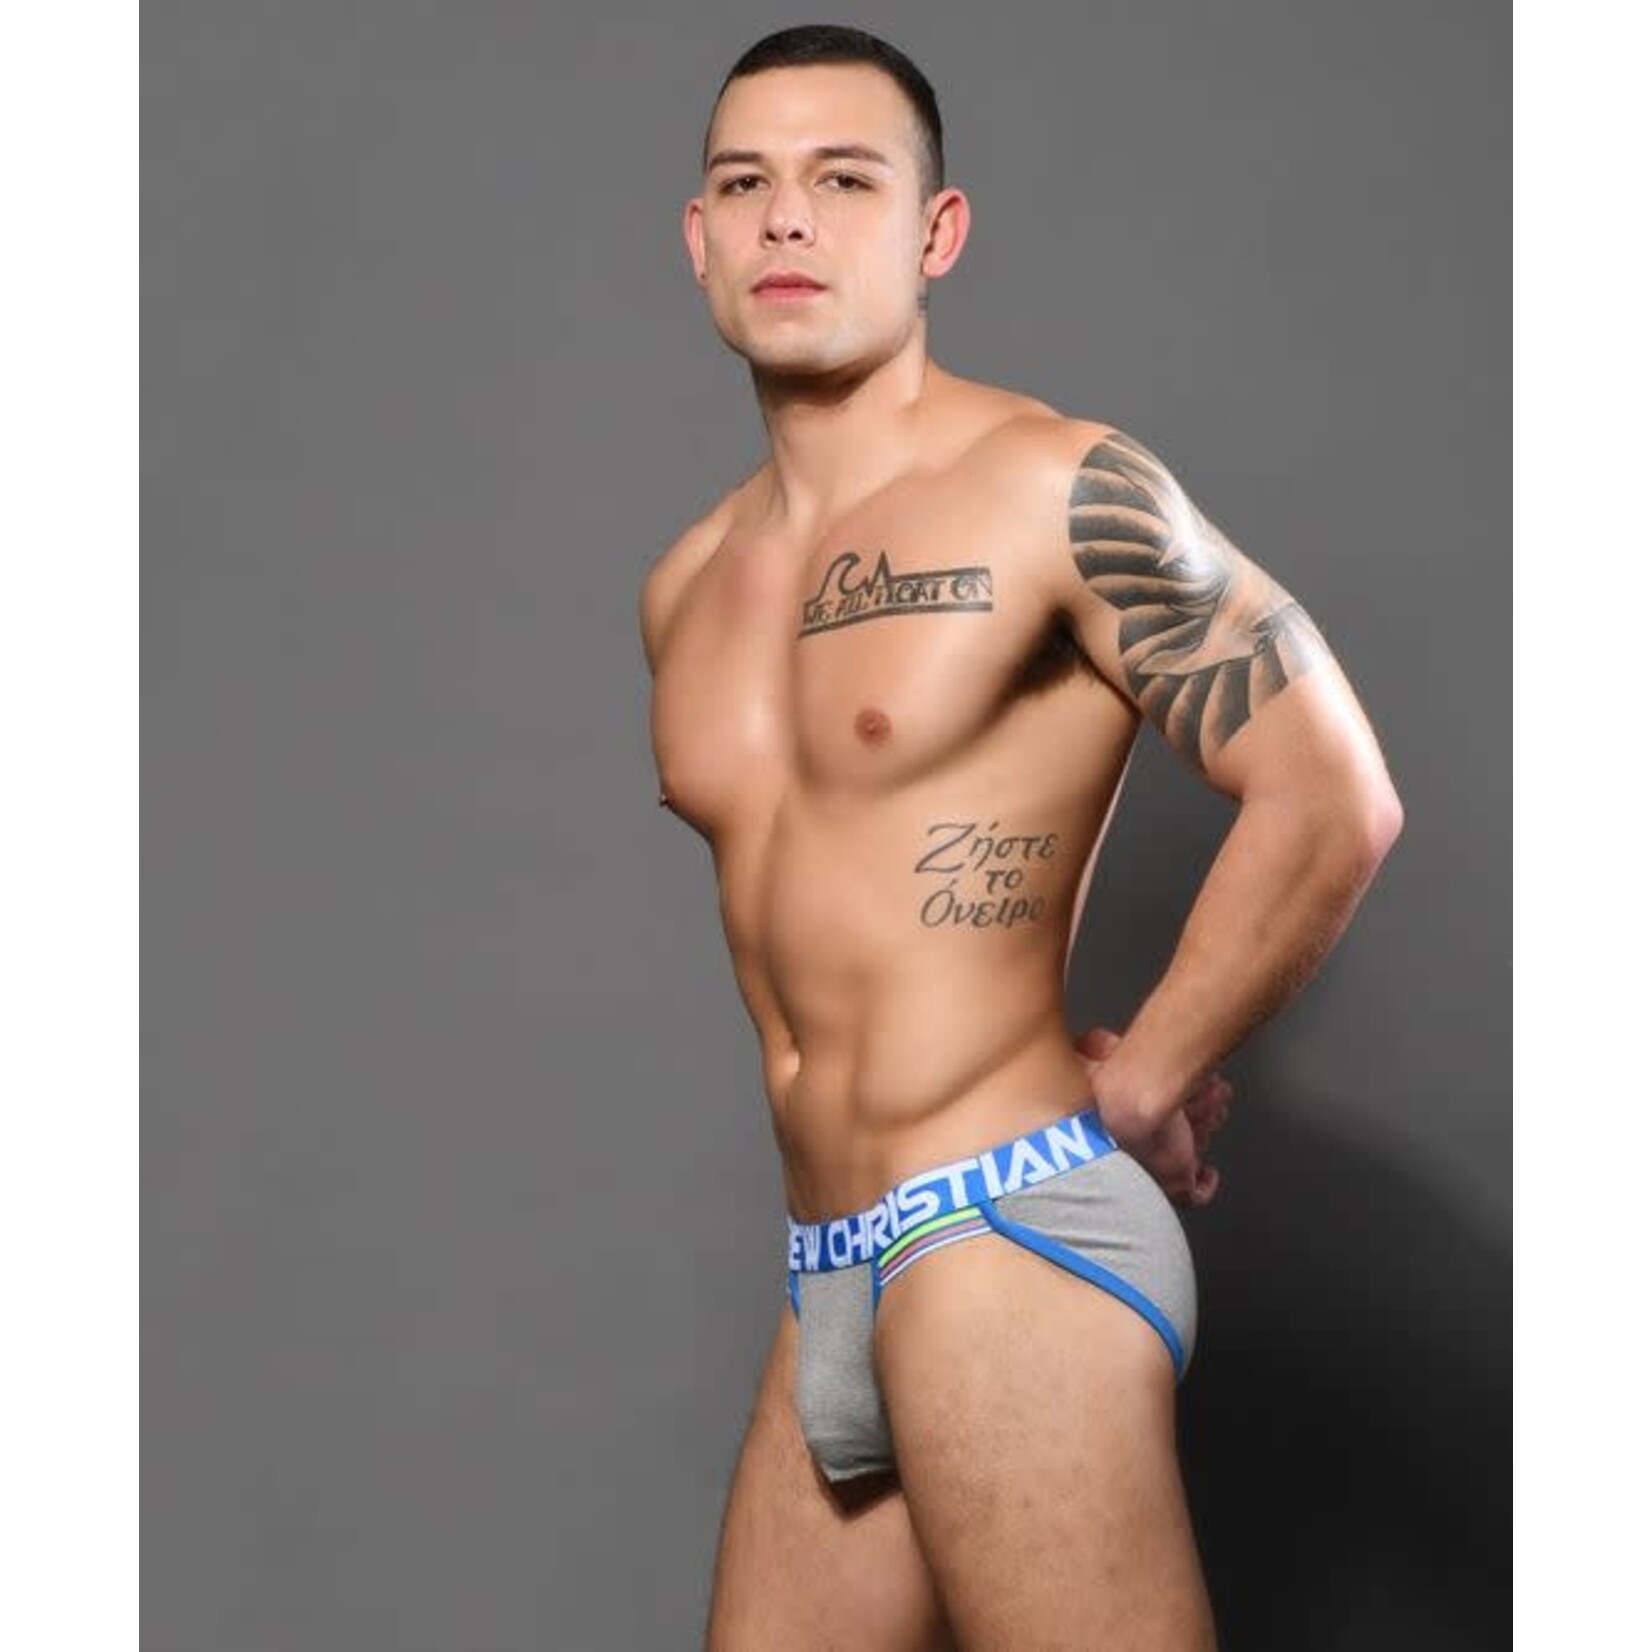 ANDREW CHRISTIAN ANDREW CHRISTIAN - ALMOST NAKED ATHLETIC BRIEF SMALL